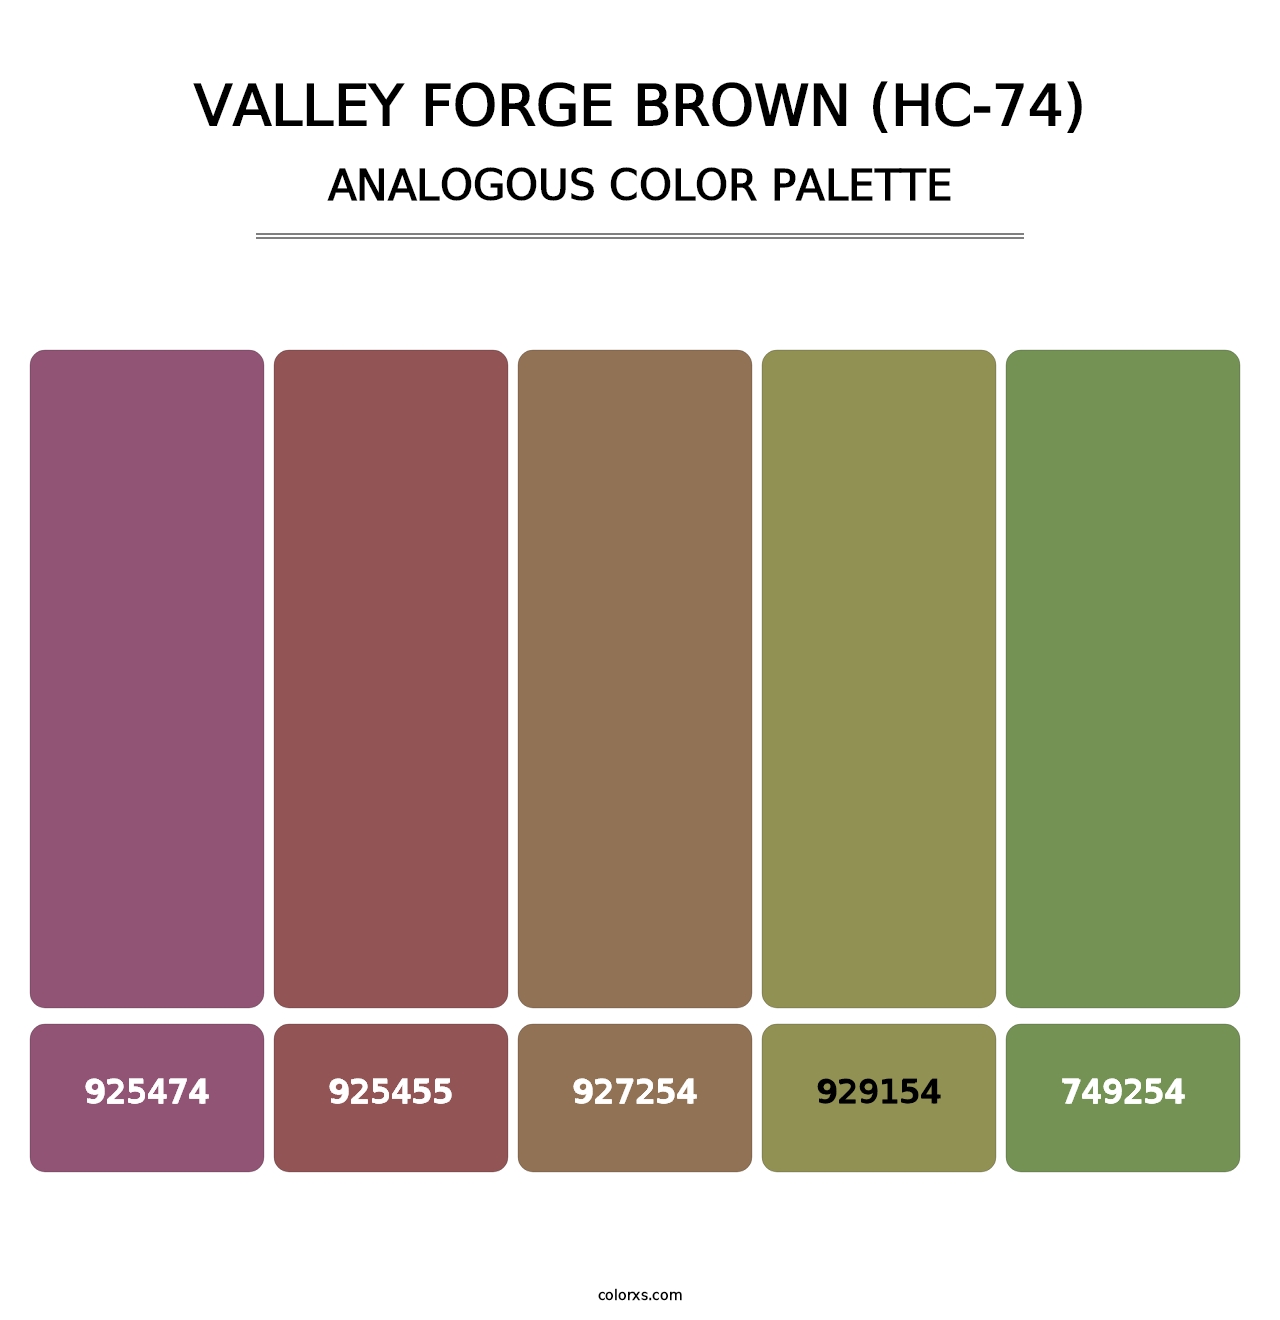 Valley Forge Brown (HC-74) - Analogous Color Palette